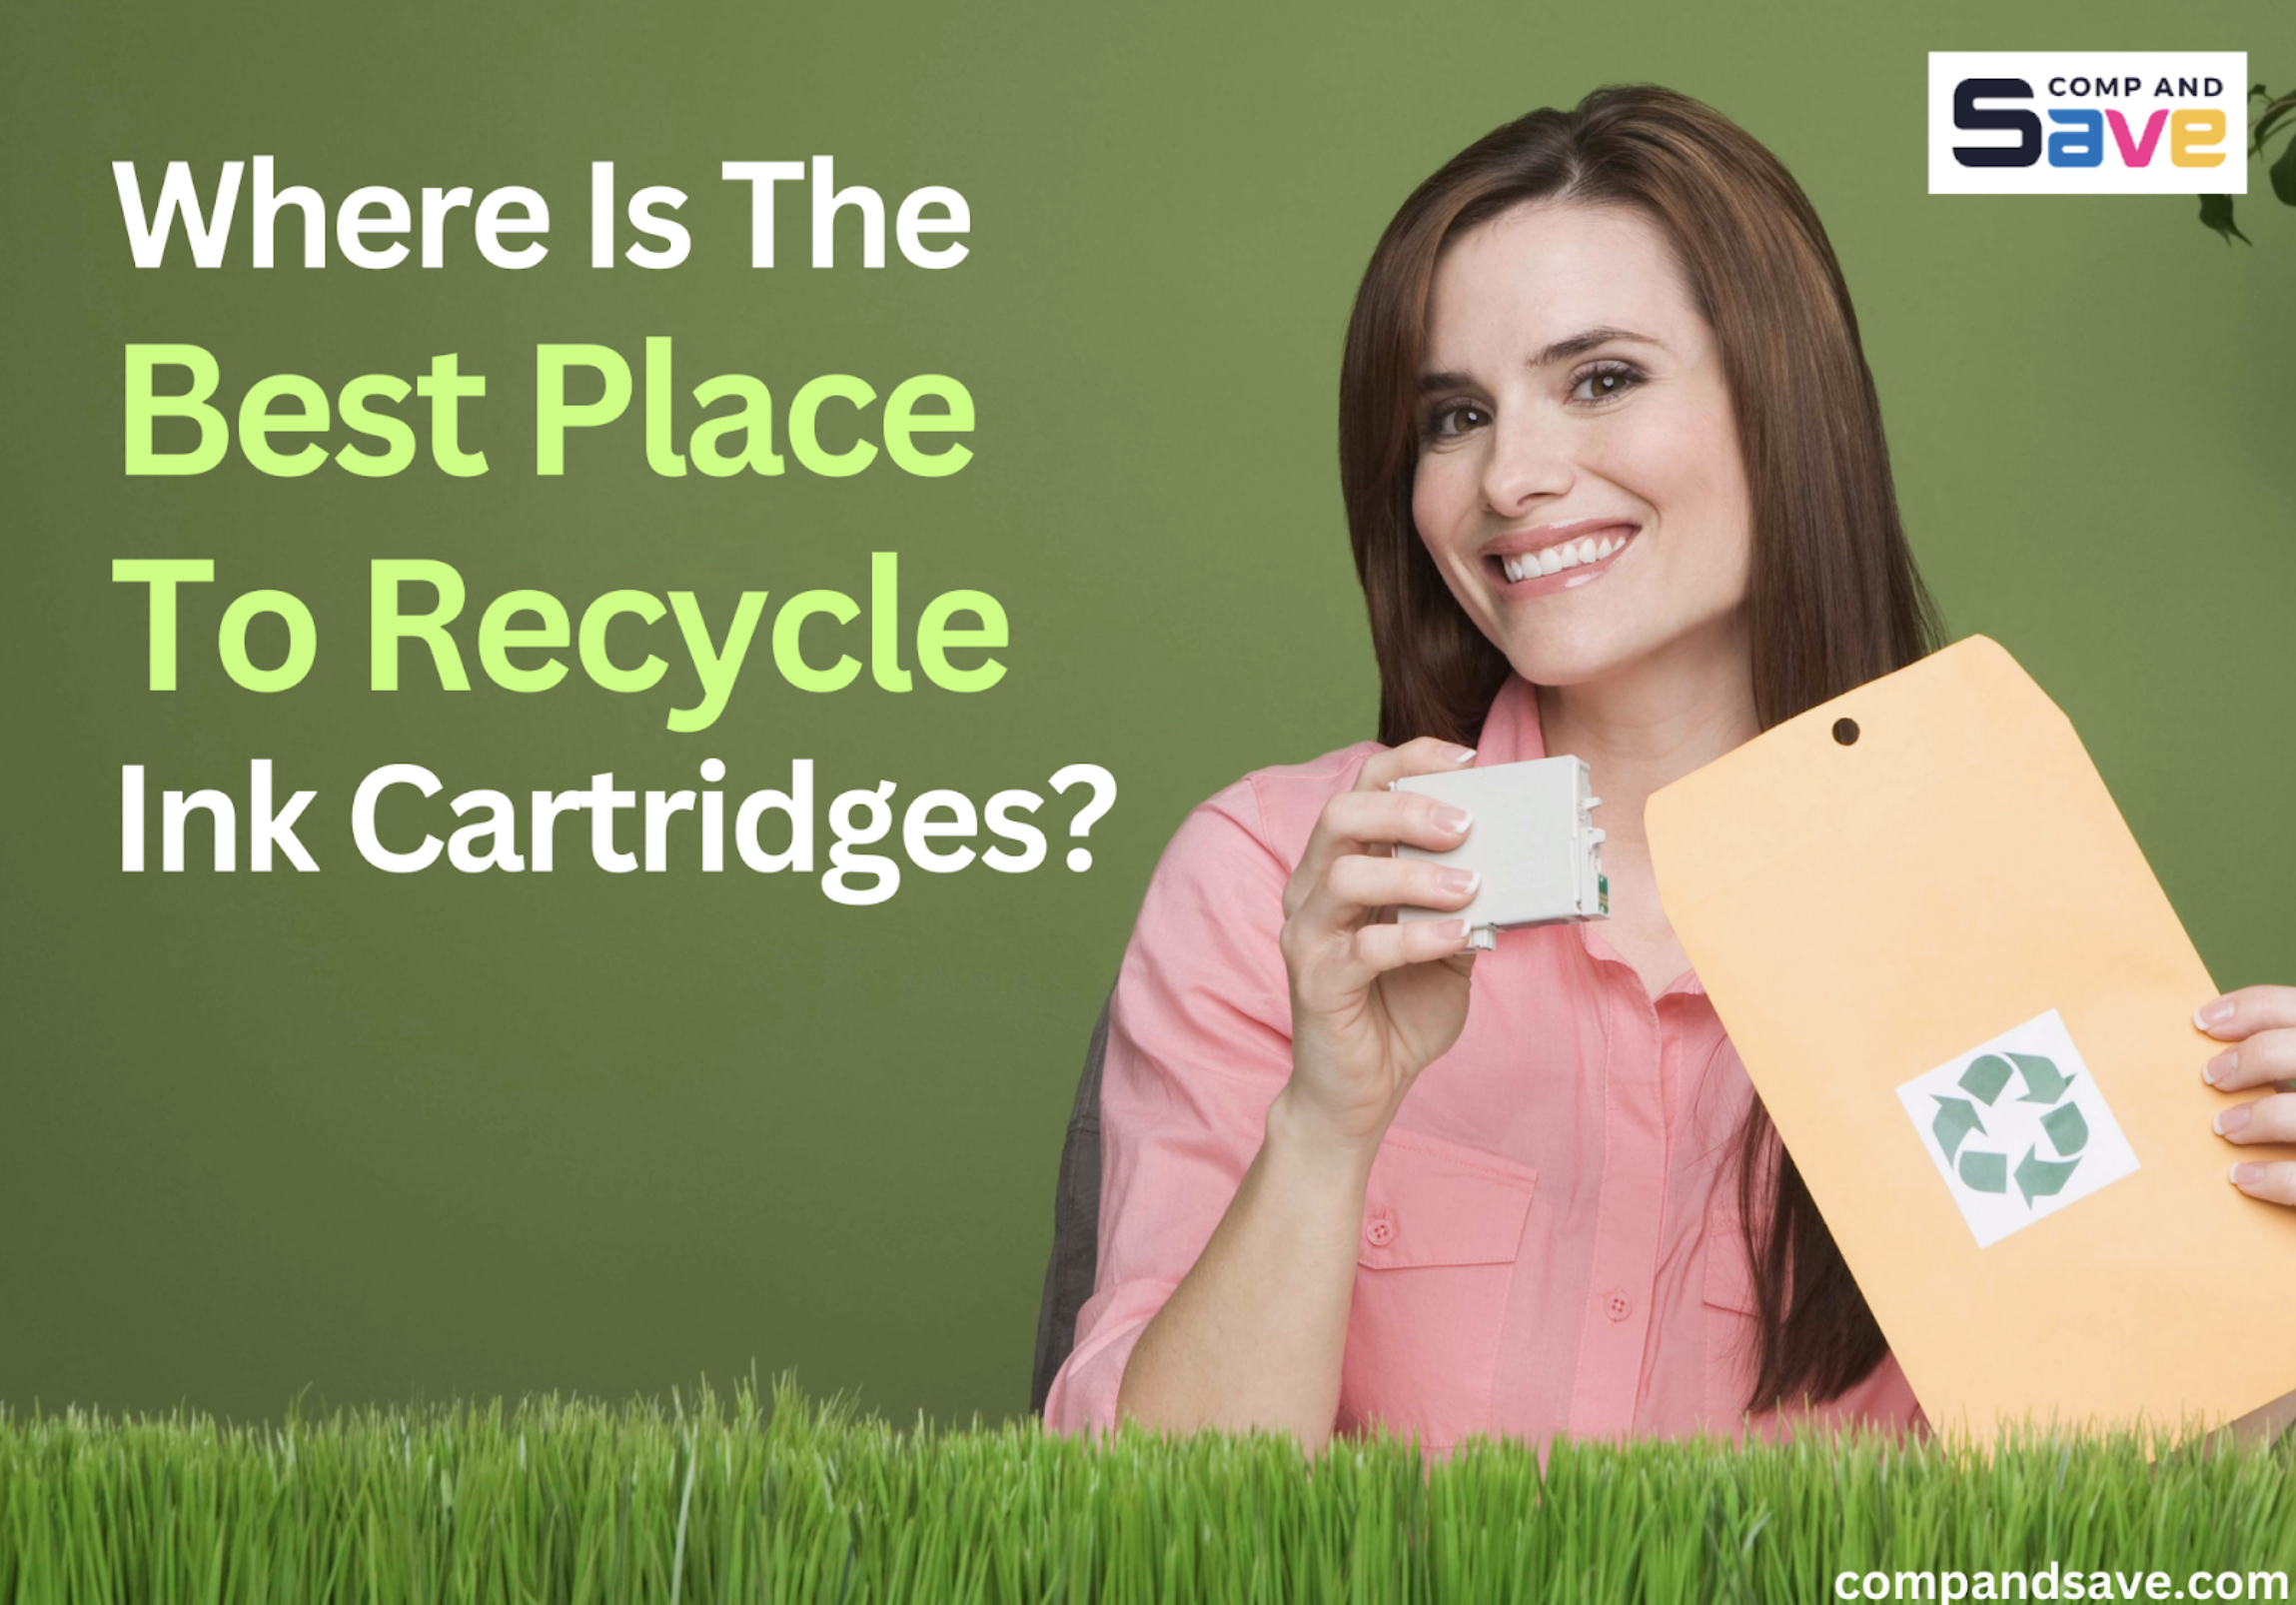 Where to recycle ink cartridges